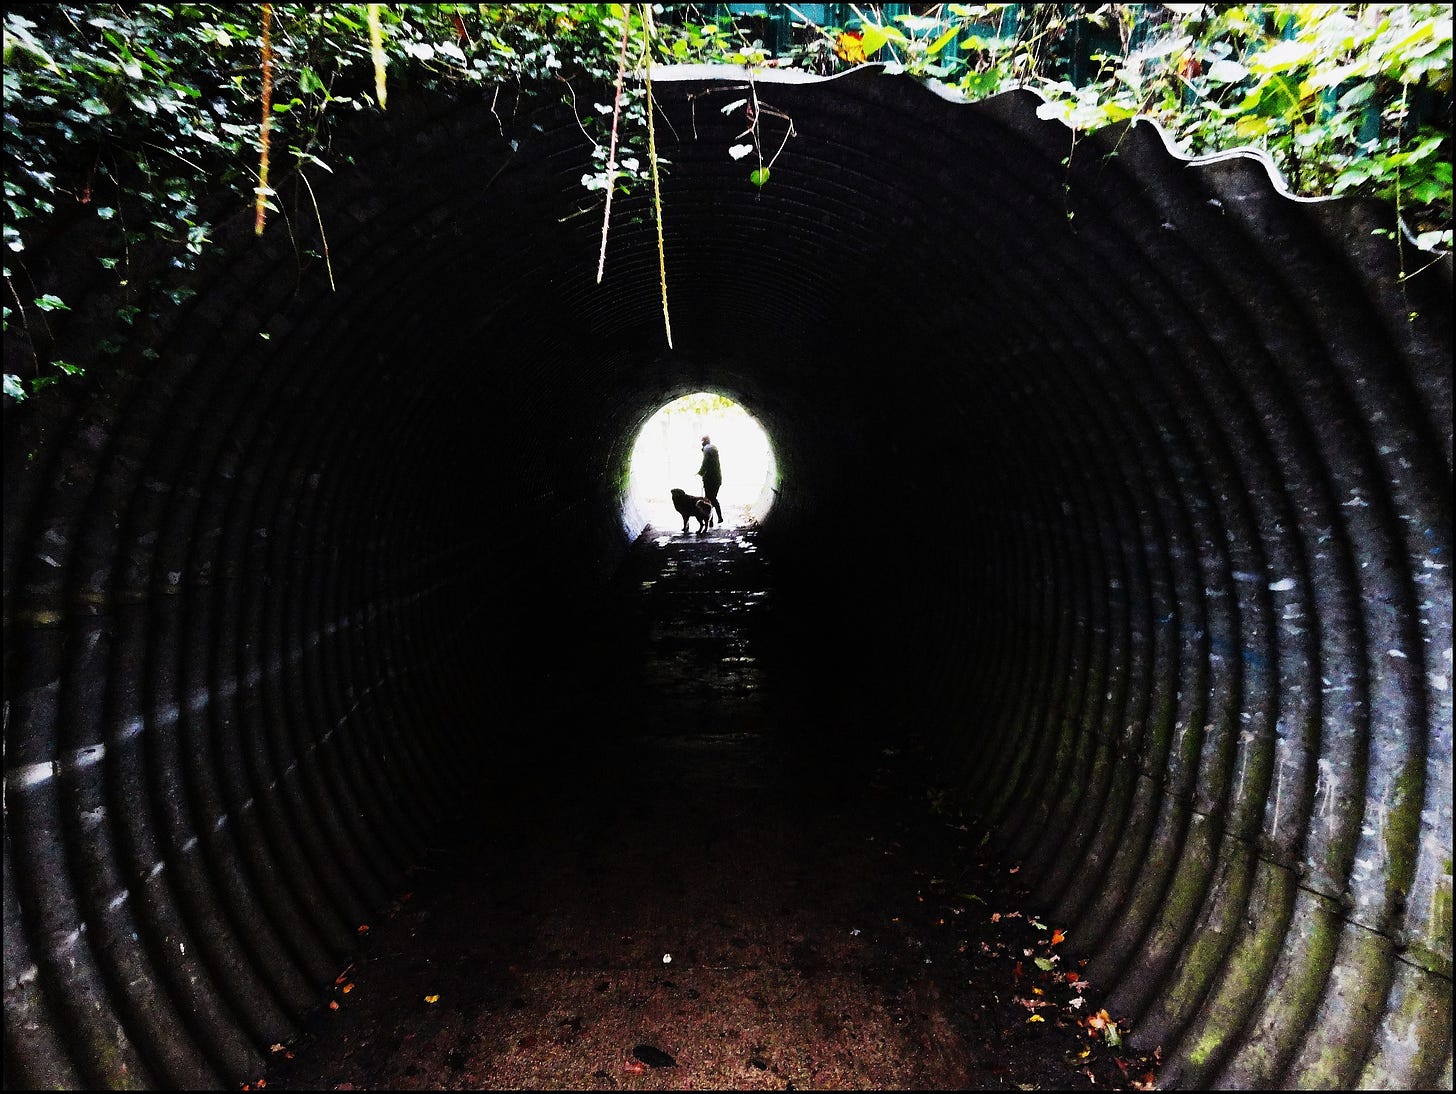 Through a drainage tunnel, a person and their dog can be seen. The tunnel is dark but near the viewer plants are visible.